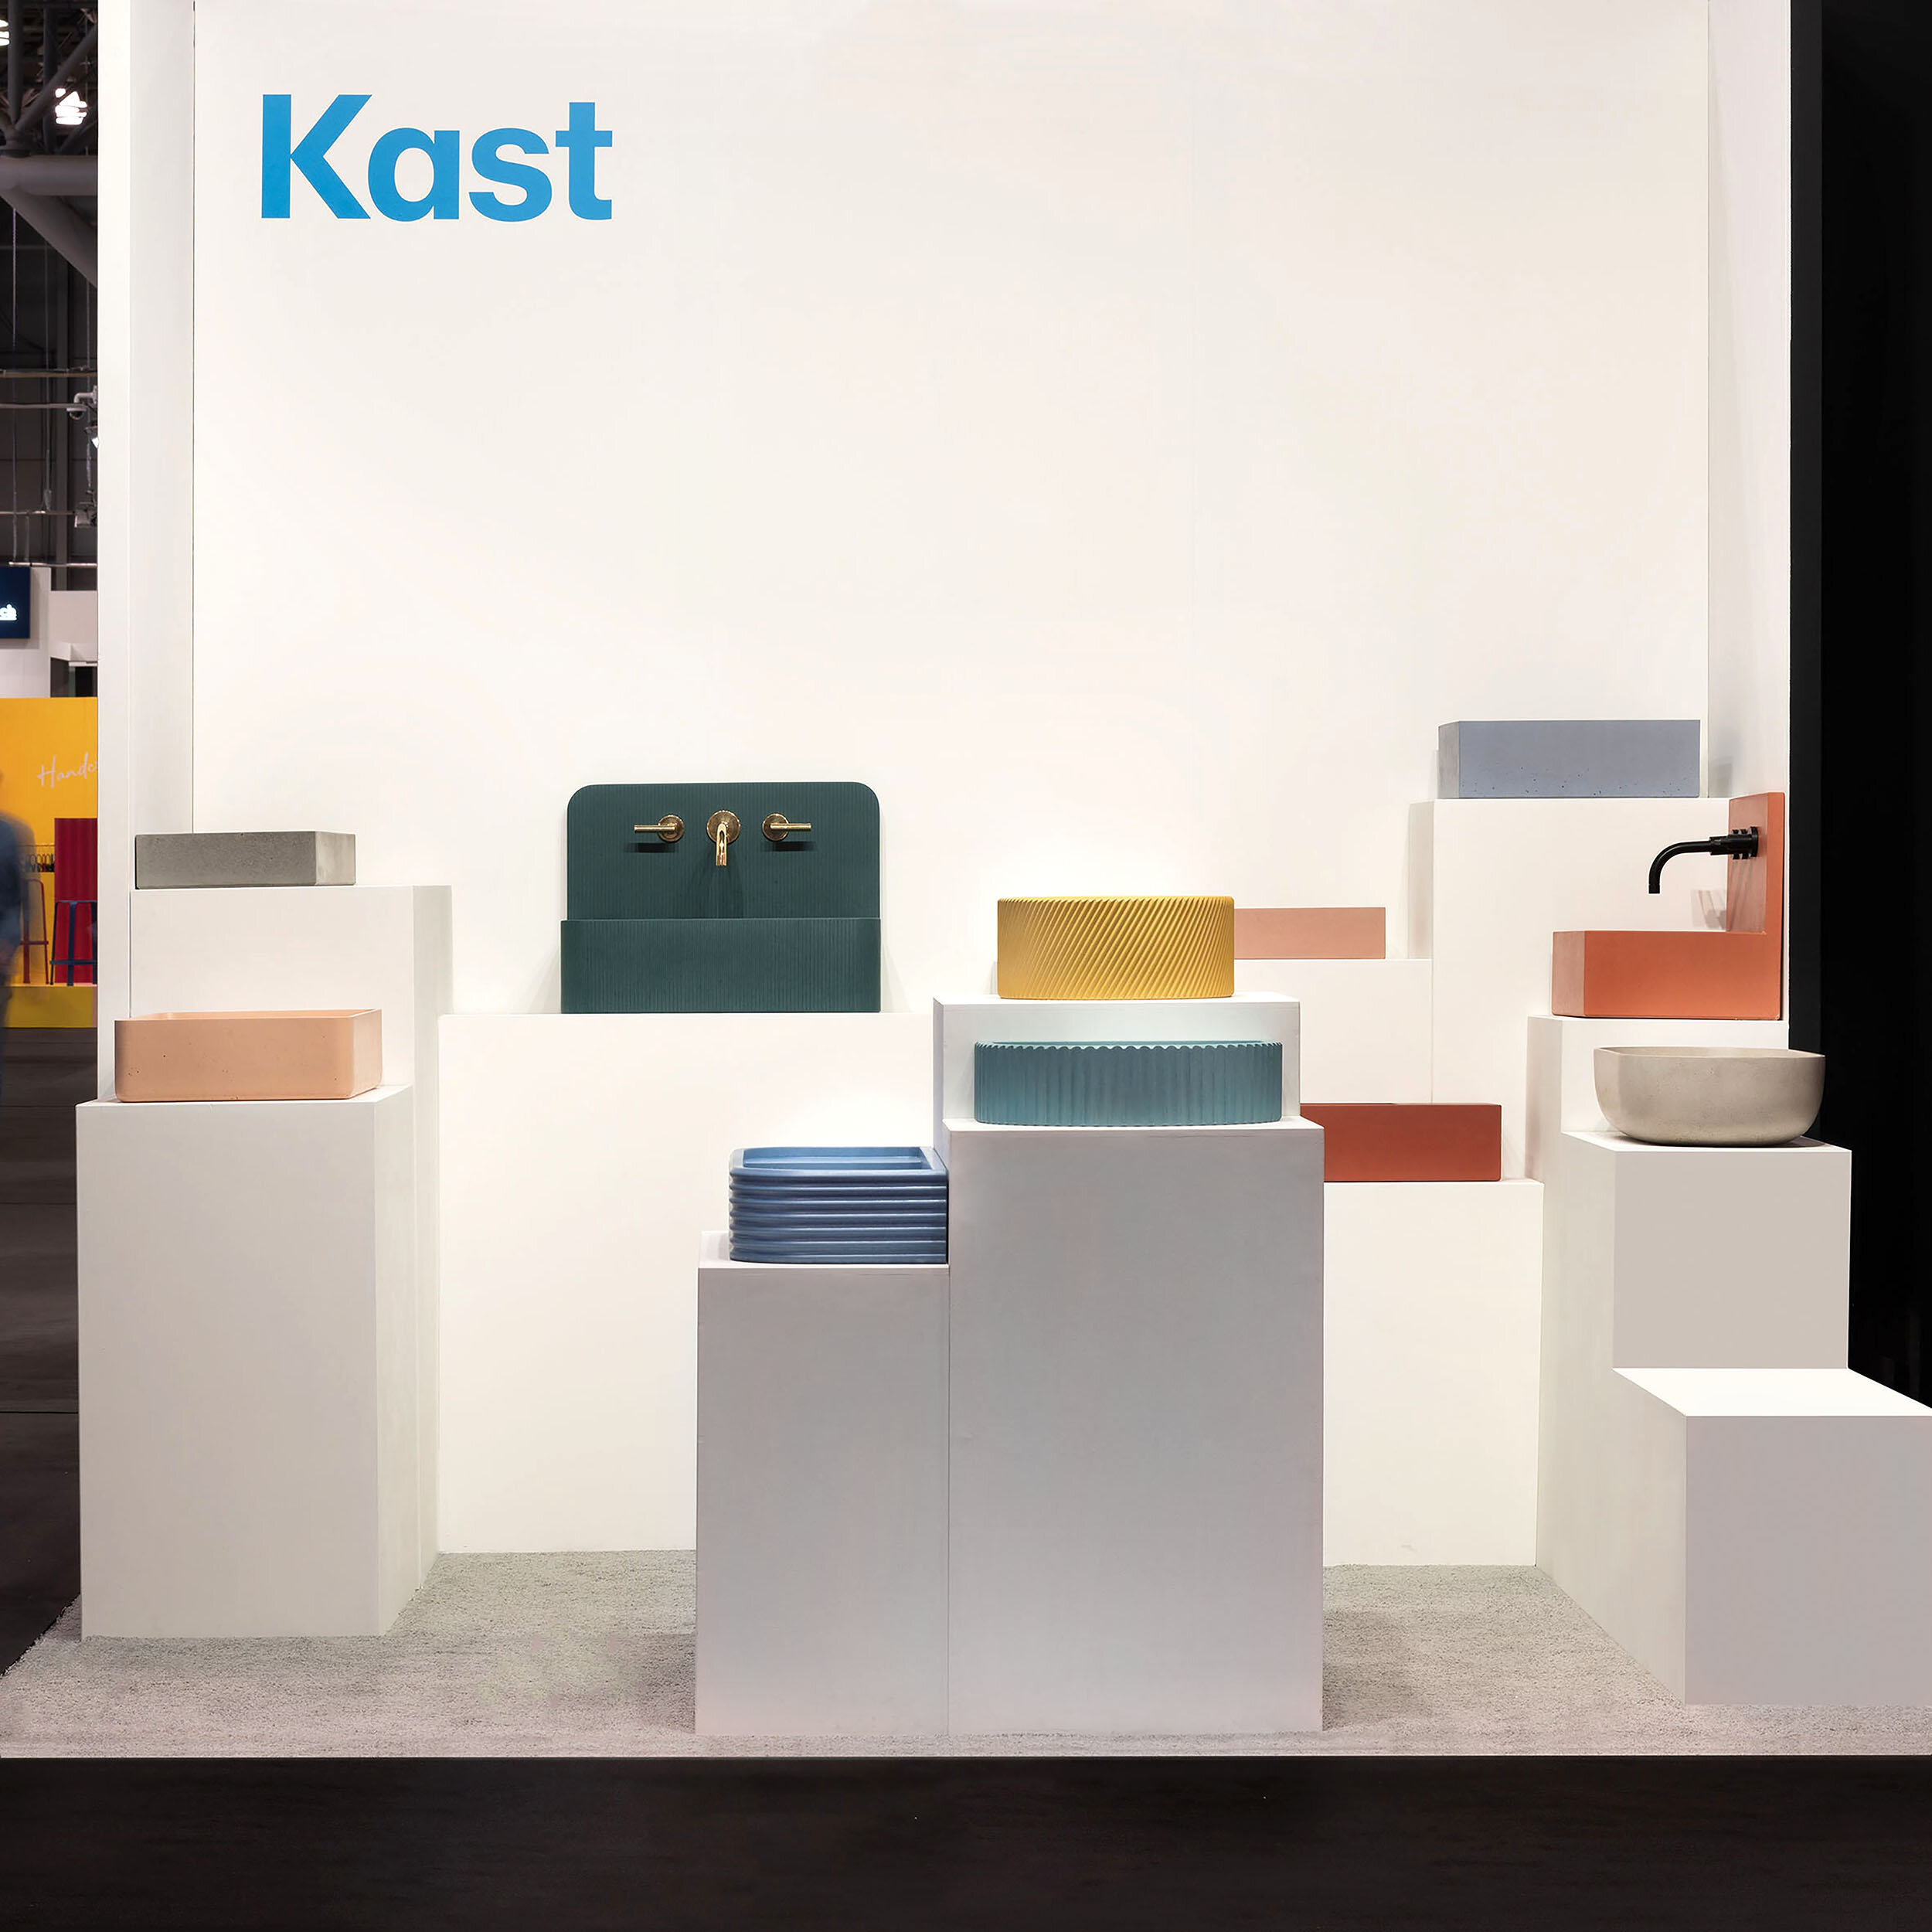 Kast ICFF Stand 2019 Front.jpg